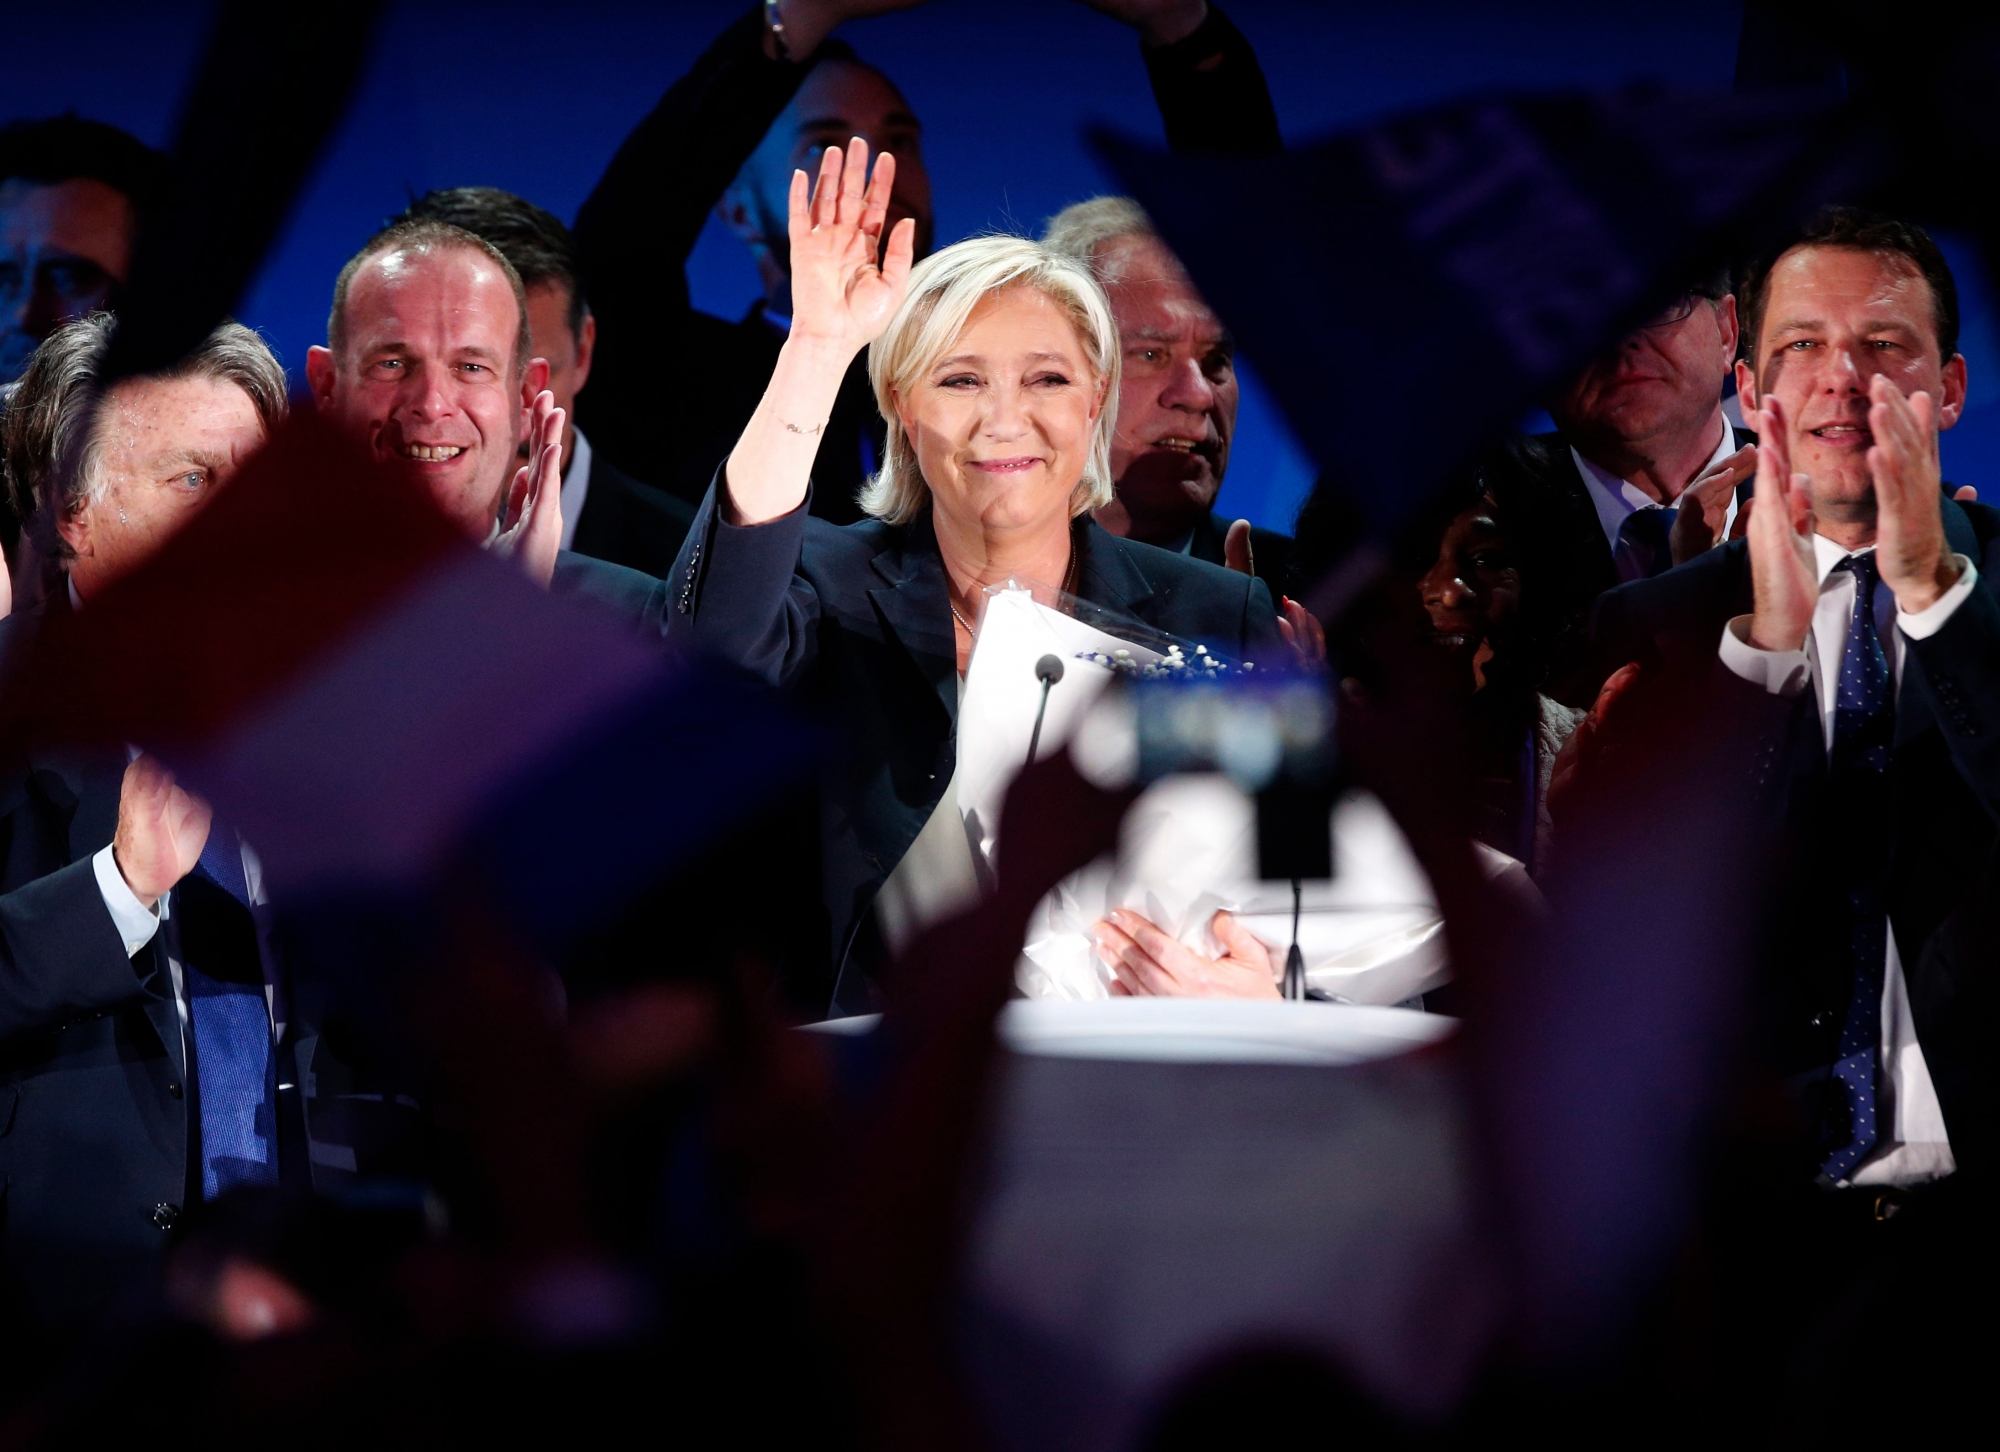 Far-right leader and candidate for the 2017 French presidential election, Marine Le Pen, waves to supporters after exit poll results of the first round of the presidential election were announced at her election day headquarters in Henin-Beaumont, northern France, Sunday, April 23, 2017. Polling agency projections show far-right leader Marine Le Pen and centrist Emmanuel Macron leading in the first-round French presidential election. (AP Photo/Michel Spingler) France Election